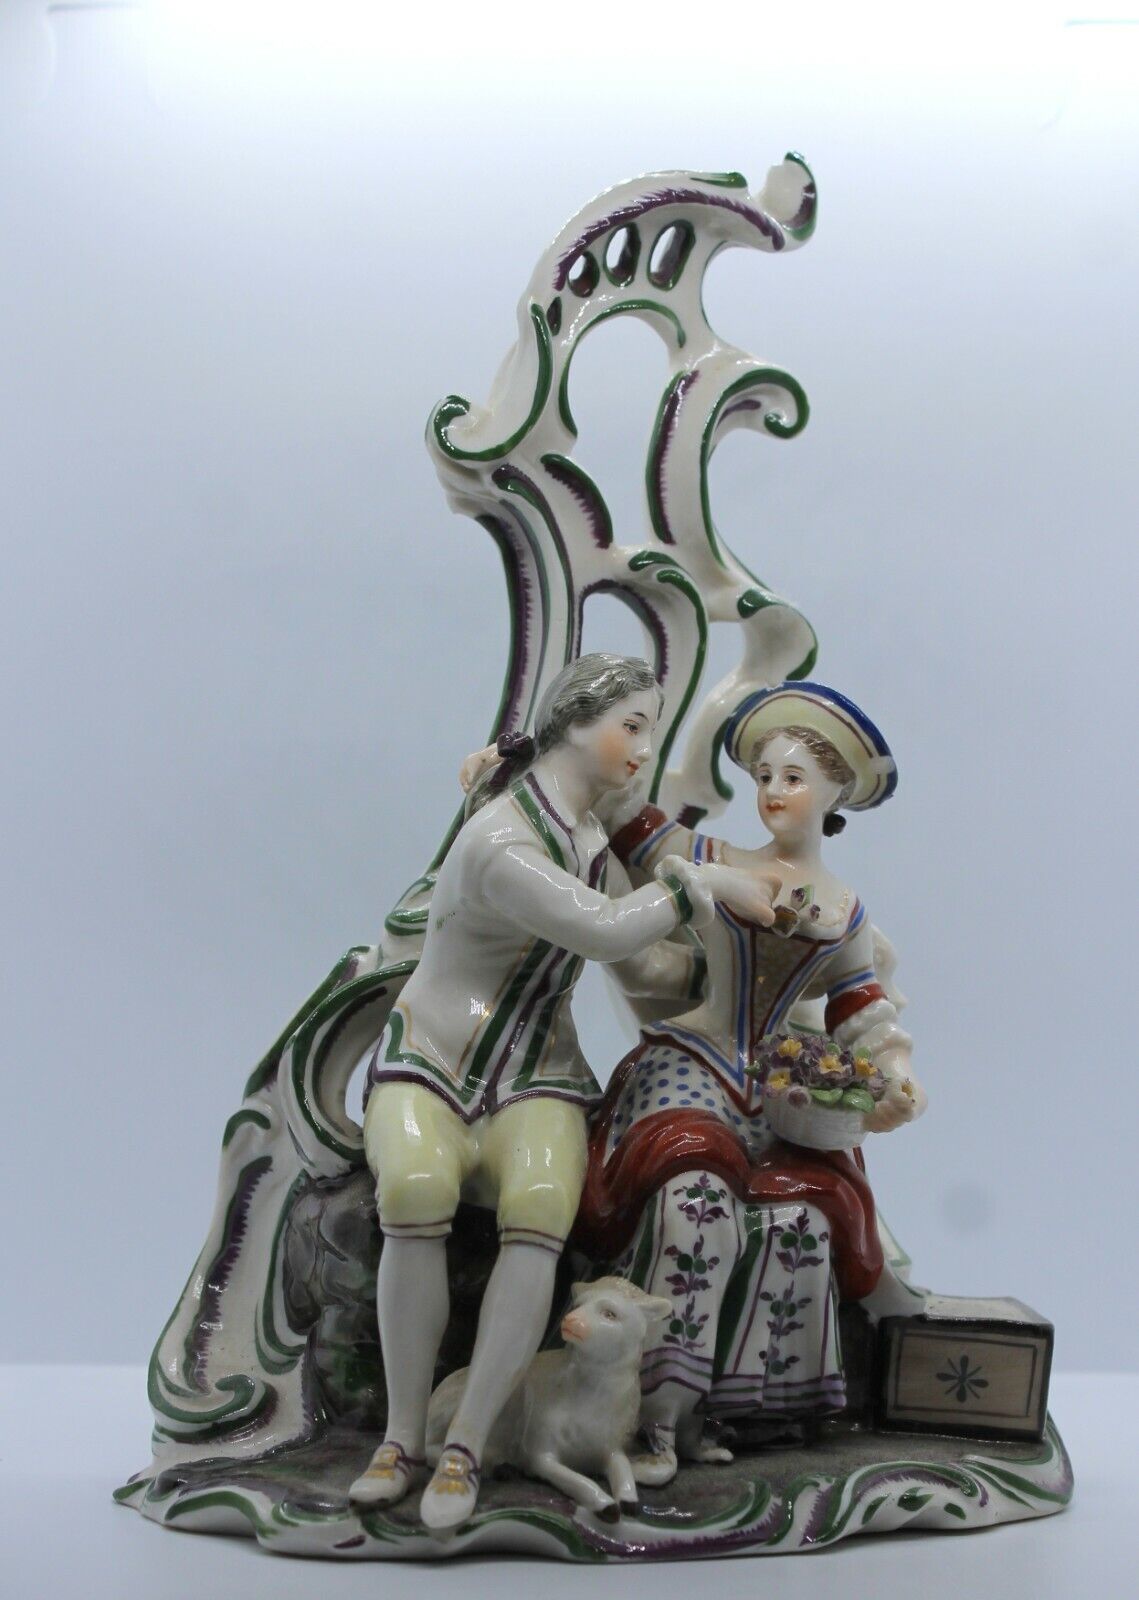 Antique Ludwigsburg Porcelain Figurine  Lovers with a Sheep Between Their Feet